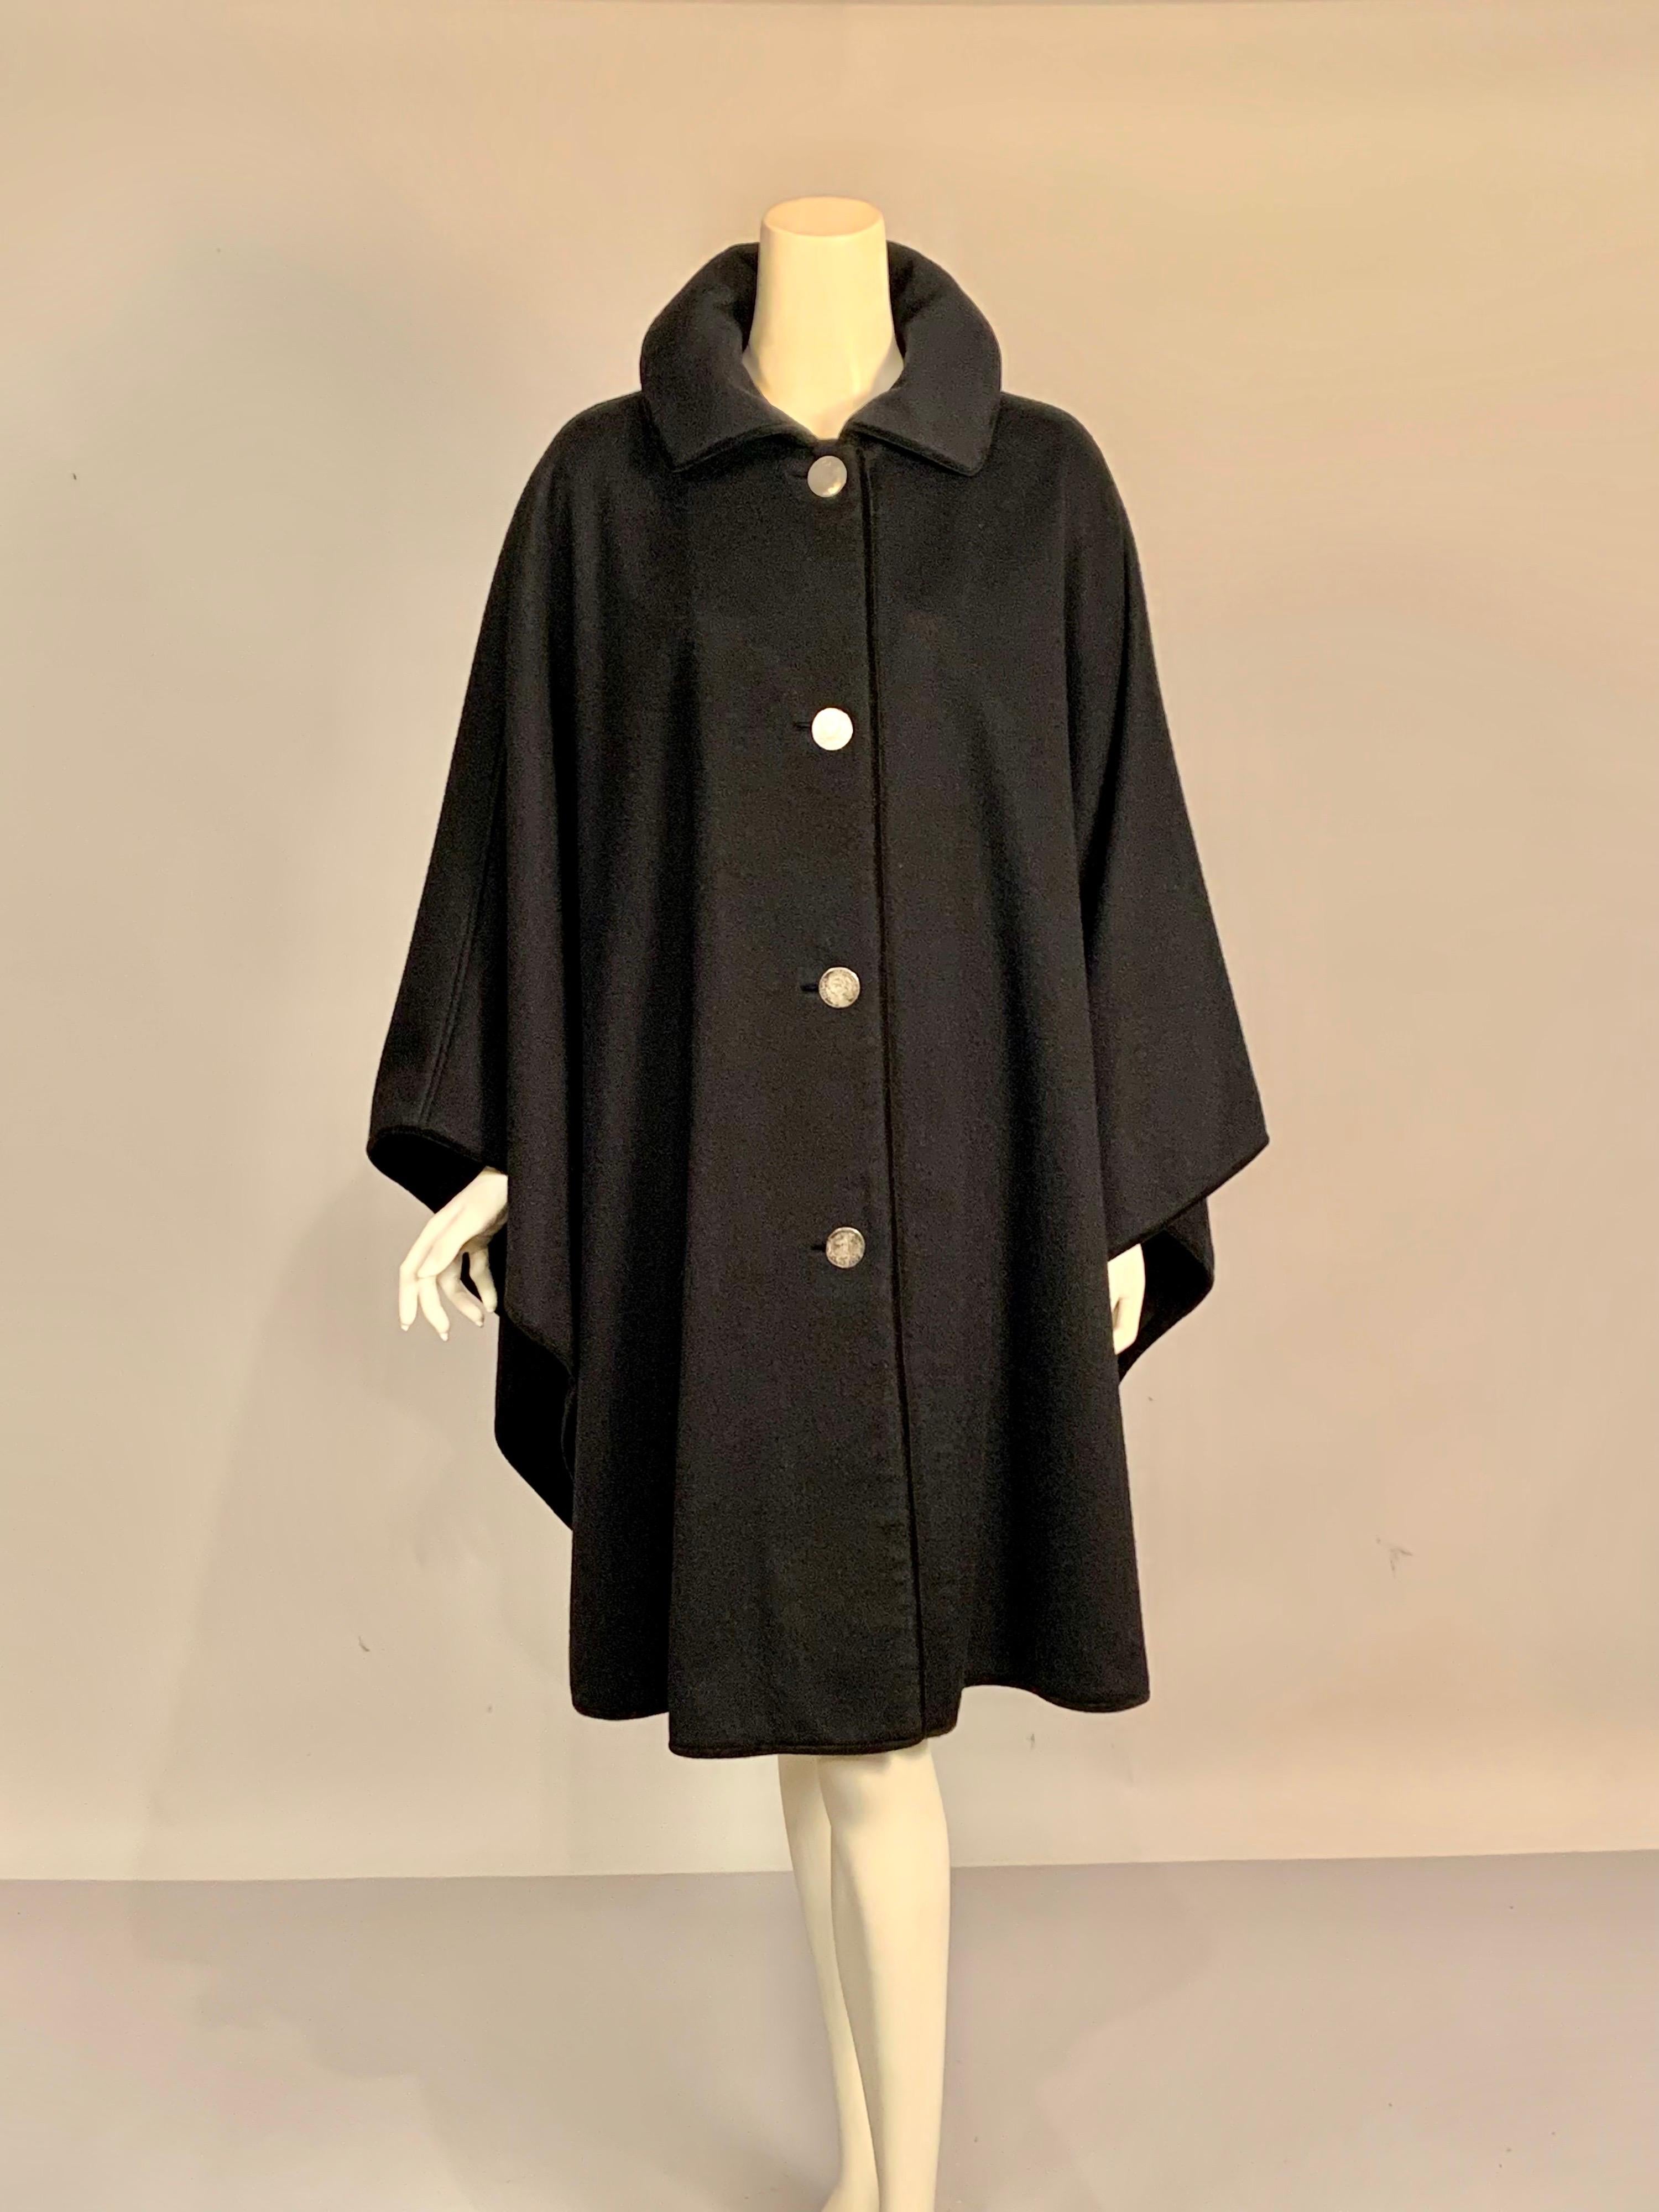 Soft & supple black wool drapes beautifully over the body, flattering every size.   This classic cape was designed by Lanz of Austria in the mid 20th century.  All of the edges are finished with brown velvet and the four silver buttons appear to be